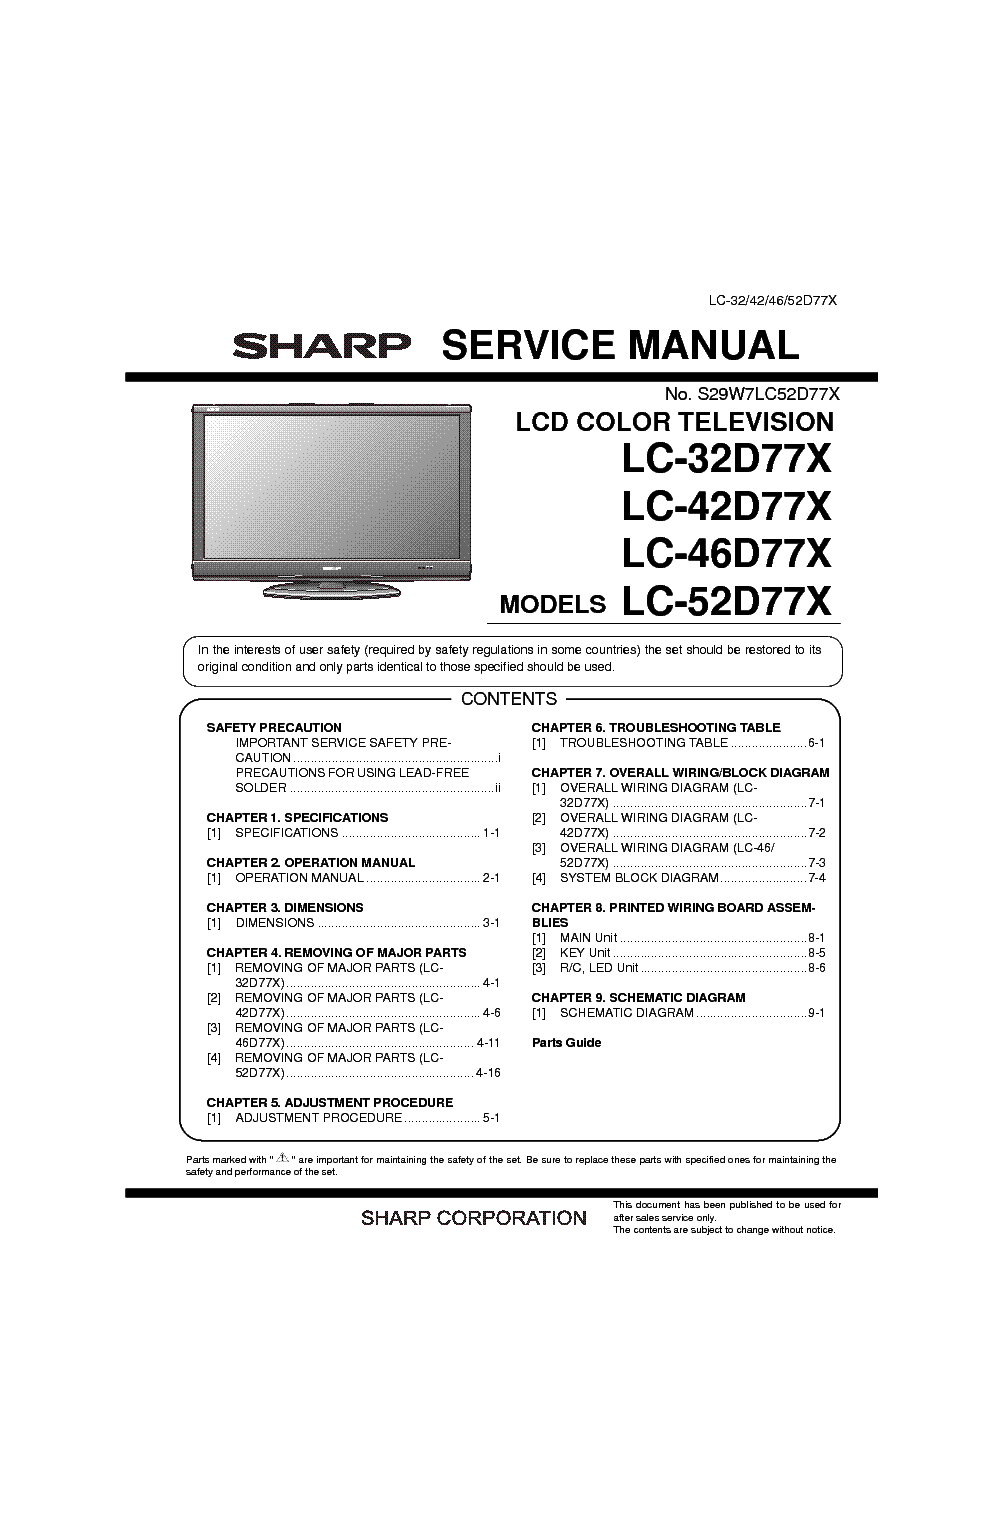 SHARP LC-32D77X LC-42D77X LC-46D77X LC-56D77X SM service manual (1st page)